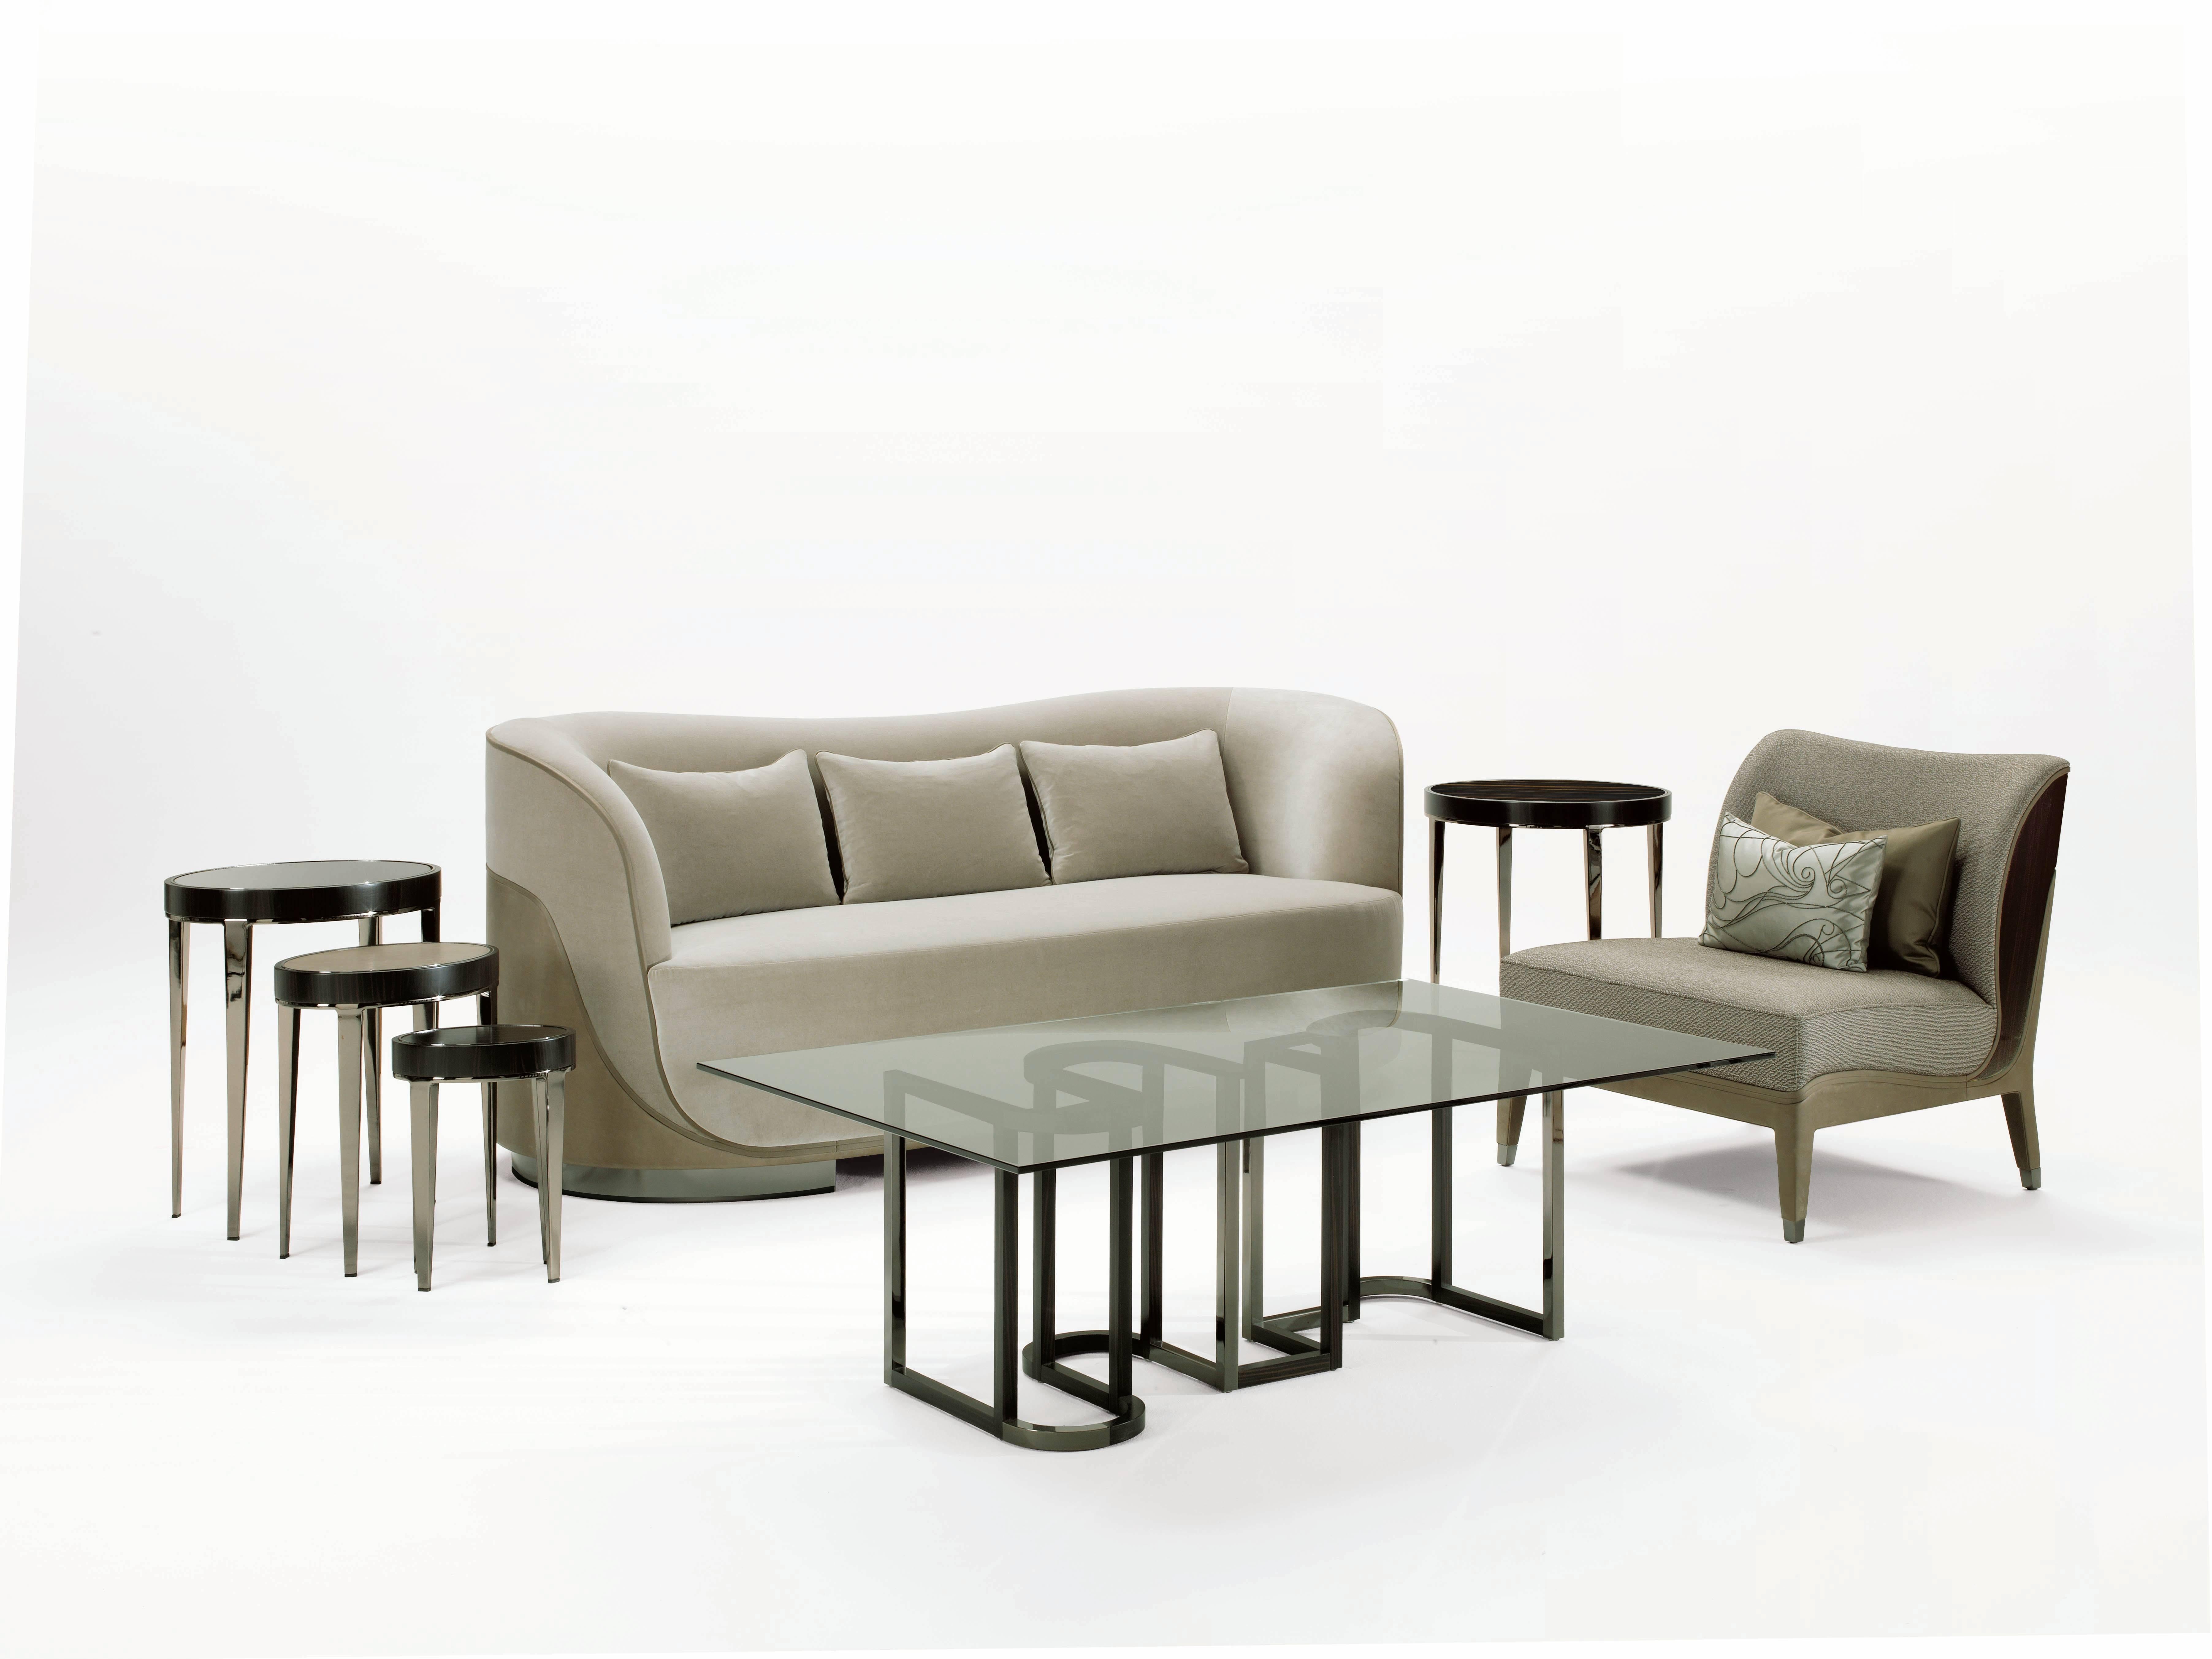 Upholstered in Rubelli 'Spritz' fabric range, color Argilla and in 'Breva' leather range, color creta with piping in Kieffer by Rubelli 'Gabardine' fabric range, color Bois.
Polished black nickel feet.

           